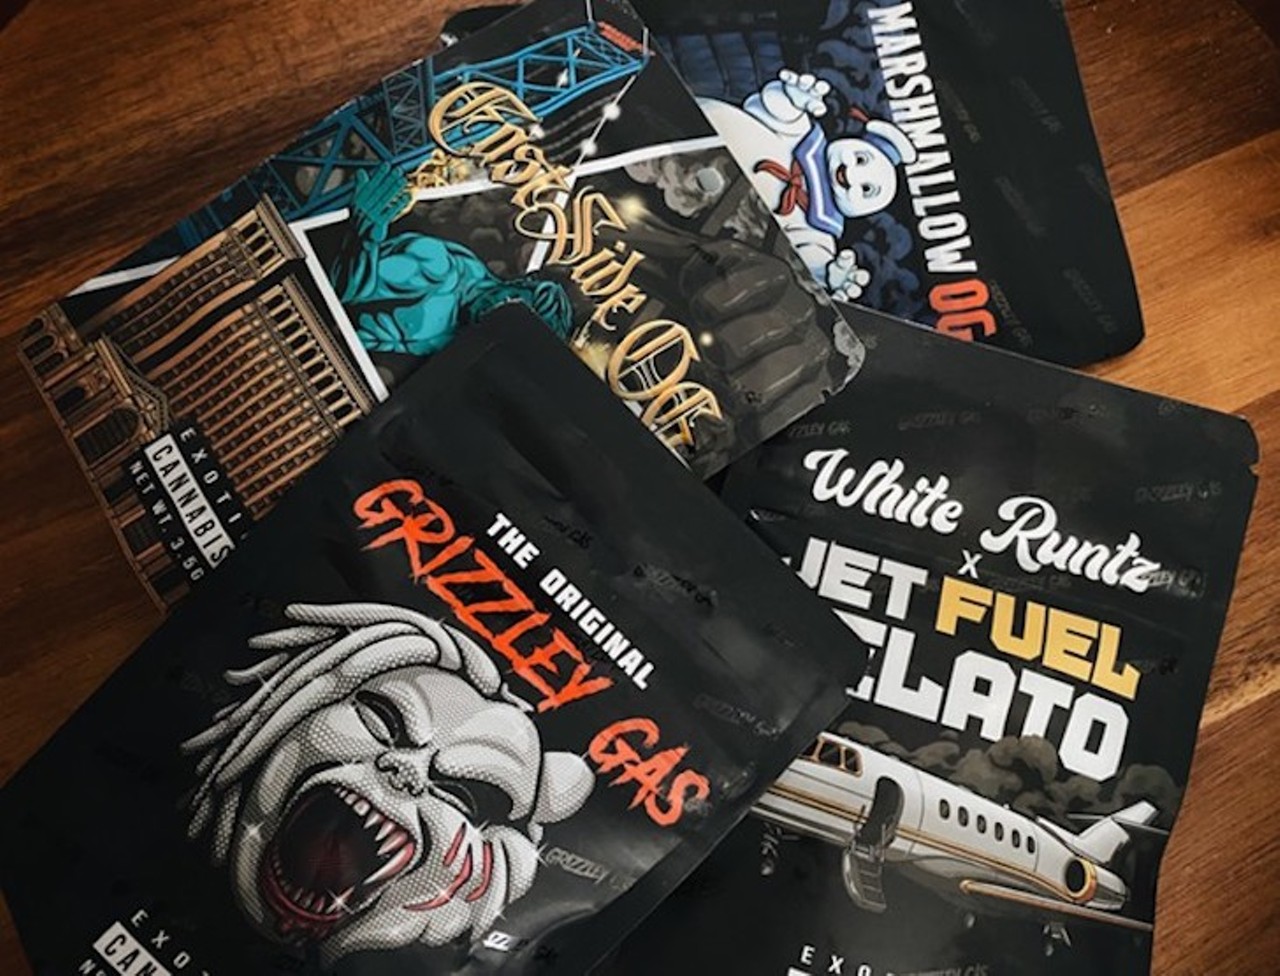 Grizzley Gas
Rapper Tee Grizzley debuted his line of cannabis, Grizzley Gas, last August. The full line of products includes The Original Grizzley Gas, Marshmallow OG, Jet Fuel Gelato, and East Side OG, and are available to purchase at Levels Cannabis in Center Line. If you&#146;re curious about what the strains are like, read our review.
Photo via Alex Washington